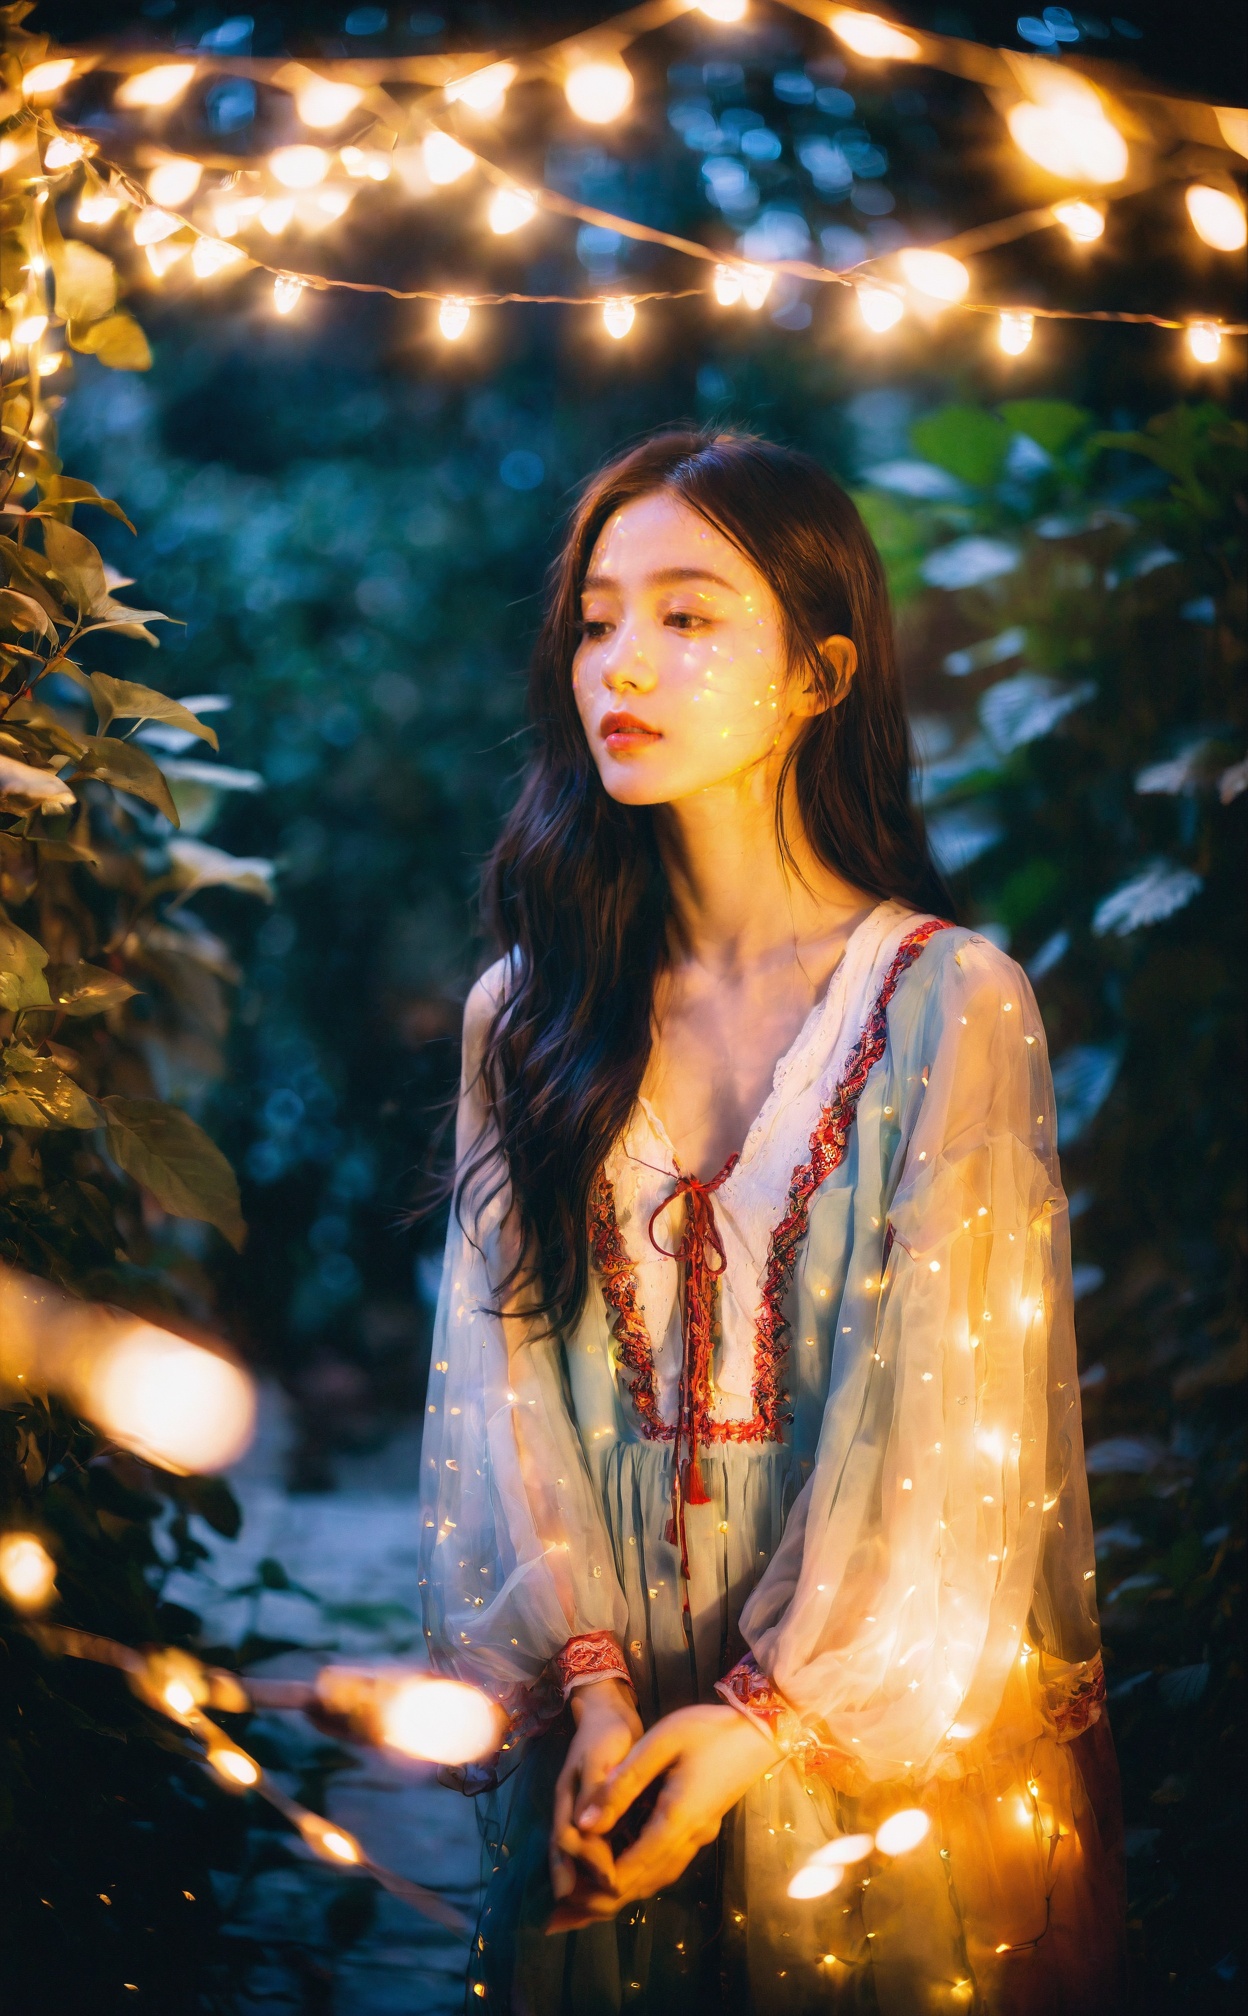 mugglelight,a woman in a bohemian dress,surrounded by fairy lights in a dimly lit garden,ethereal ambiance,magical glow,dreamy expression,enchanting evening.,korean girl,black hair